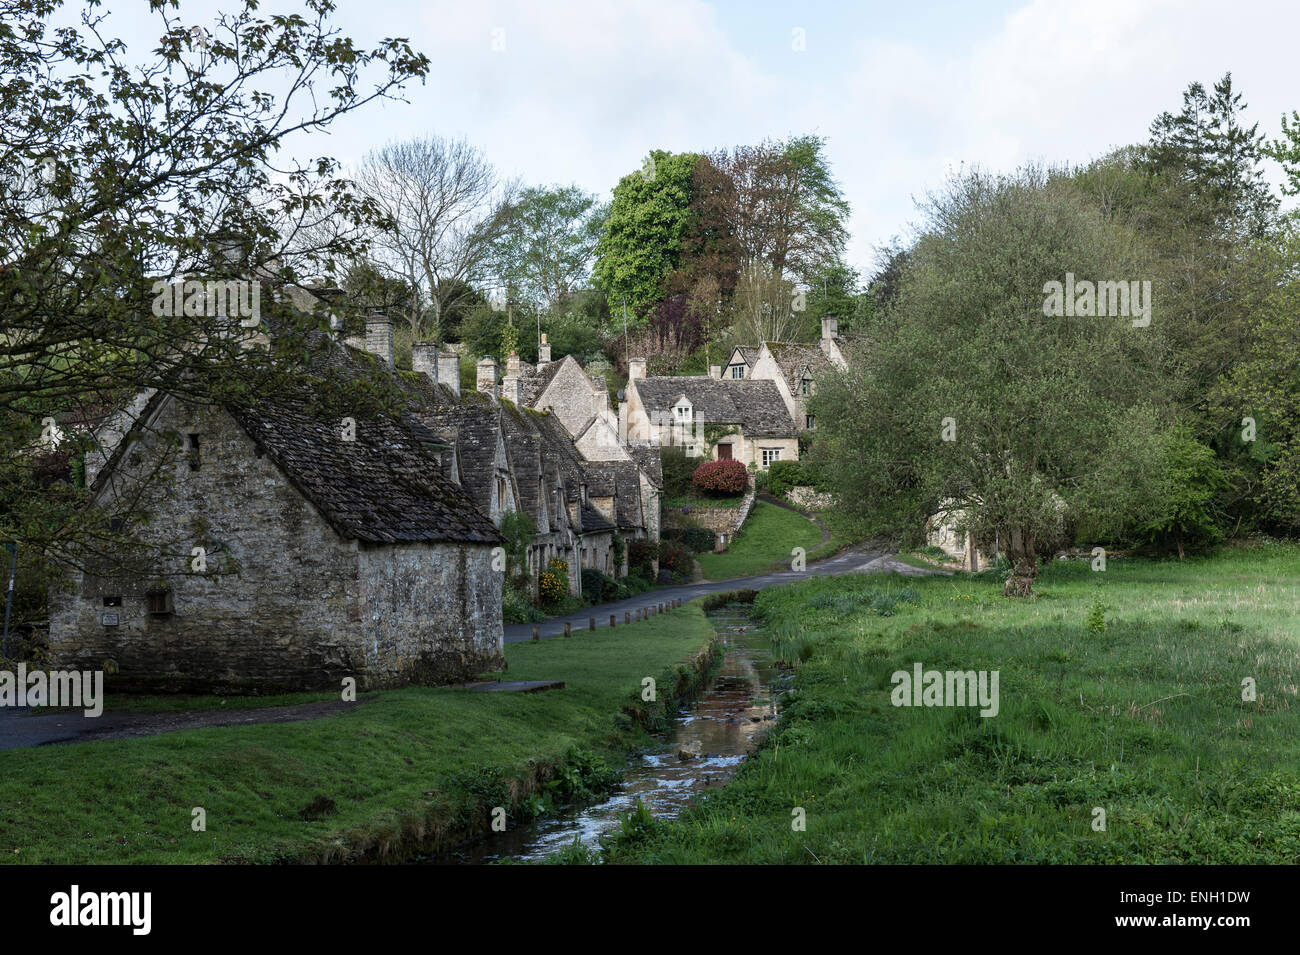 Pictures From The World Famous Village In The Cotswolds Called Bibury  in England .Described By William Morris Designer Most Beautiful Village England Stock Photo